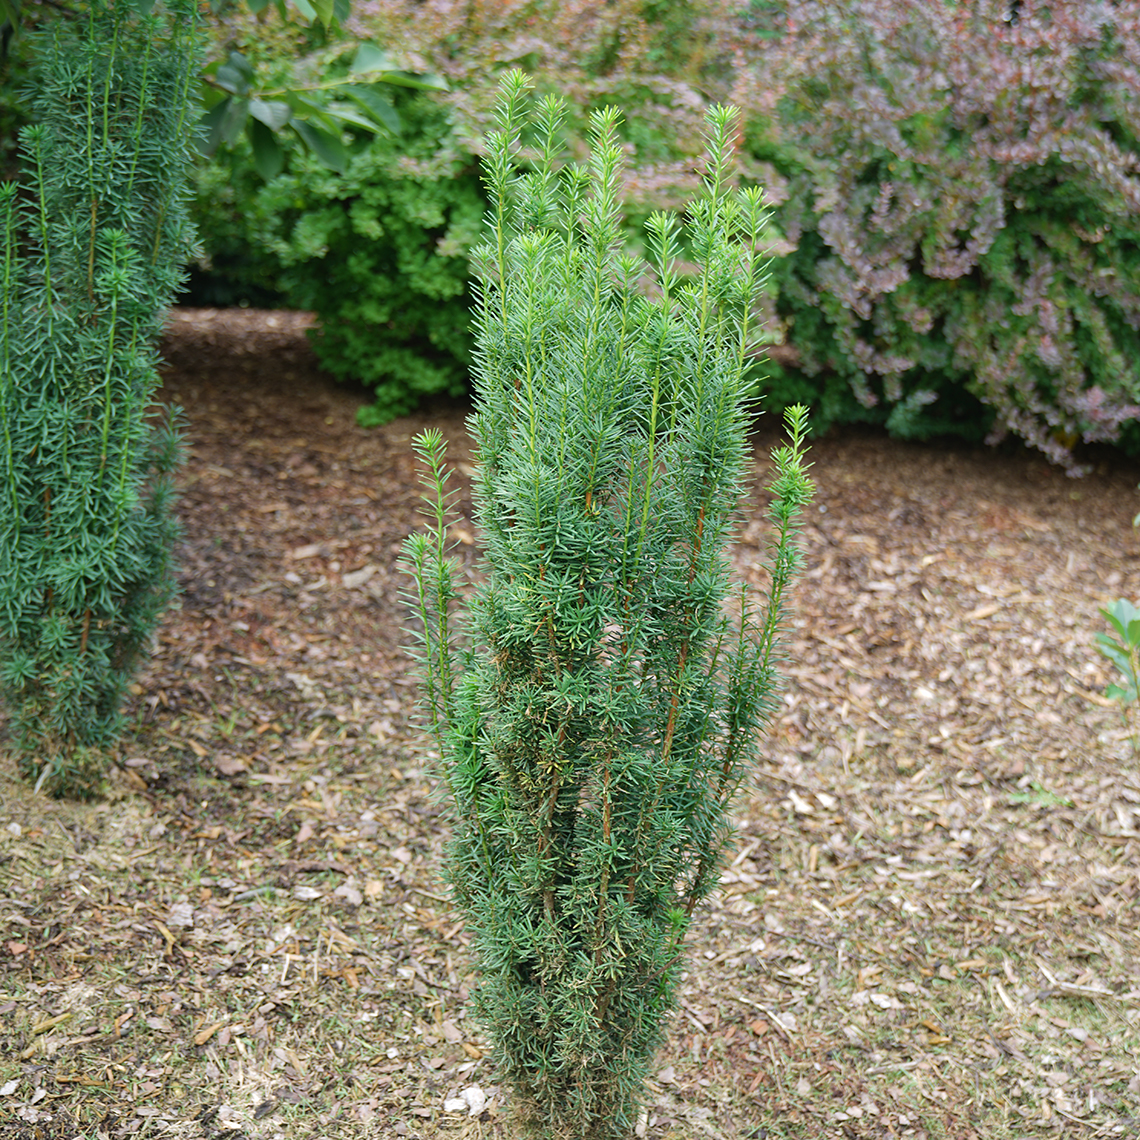 A small specimen of Stonehenge Skinny yew surrounded by mulch